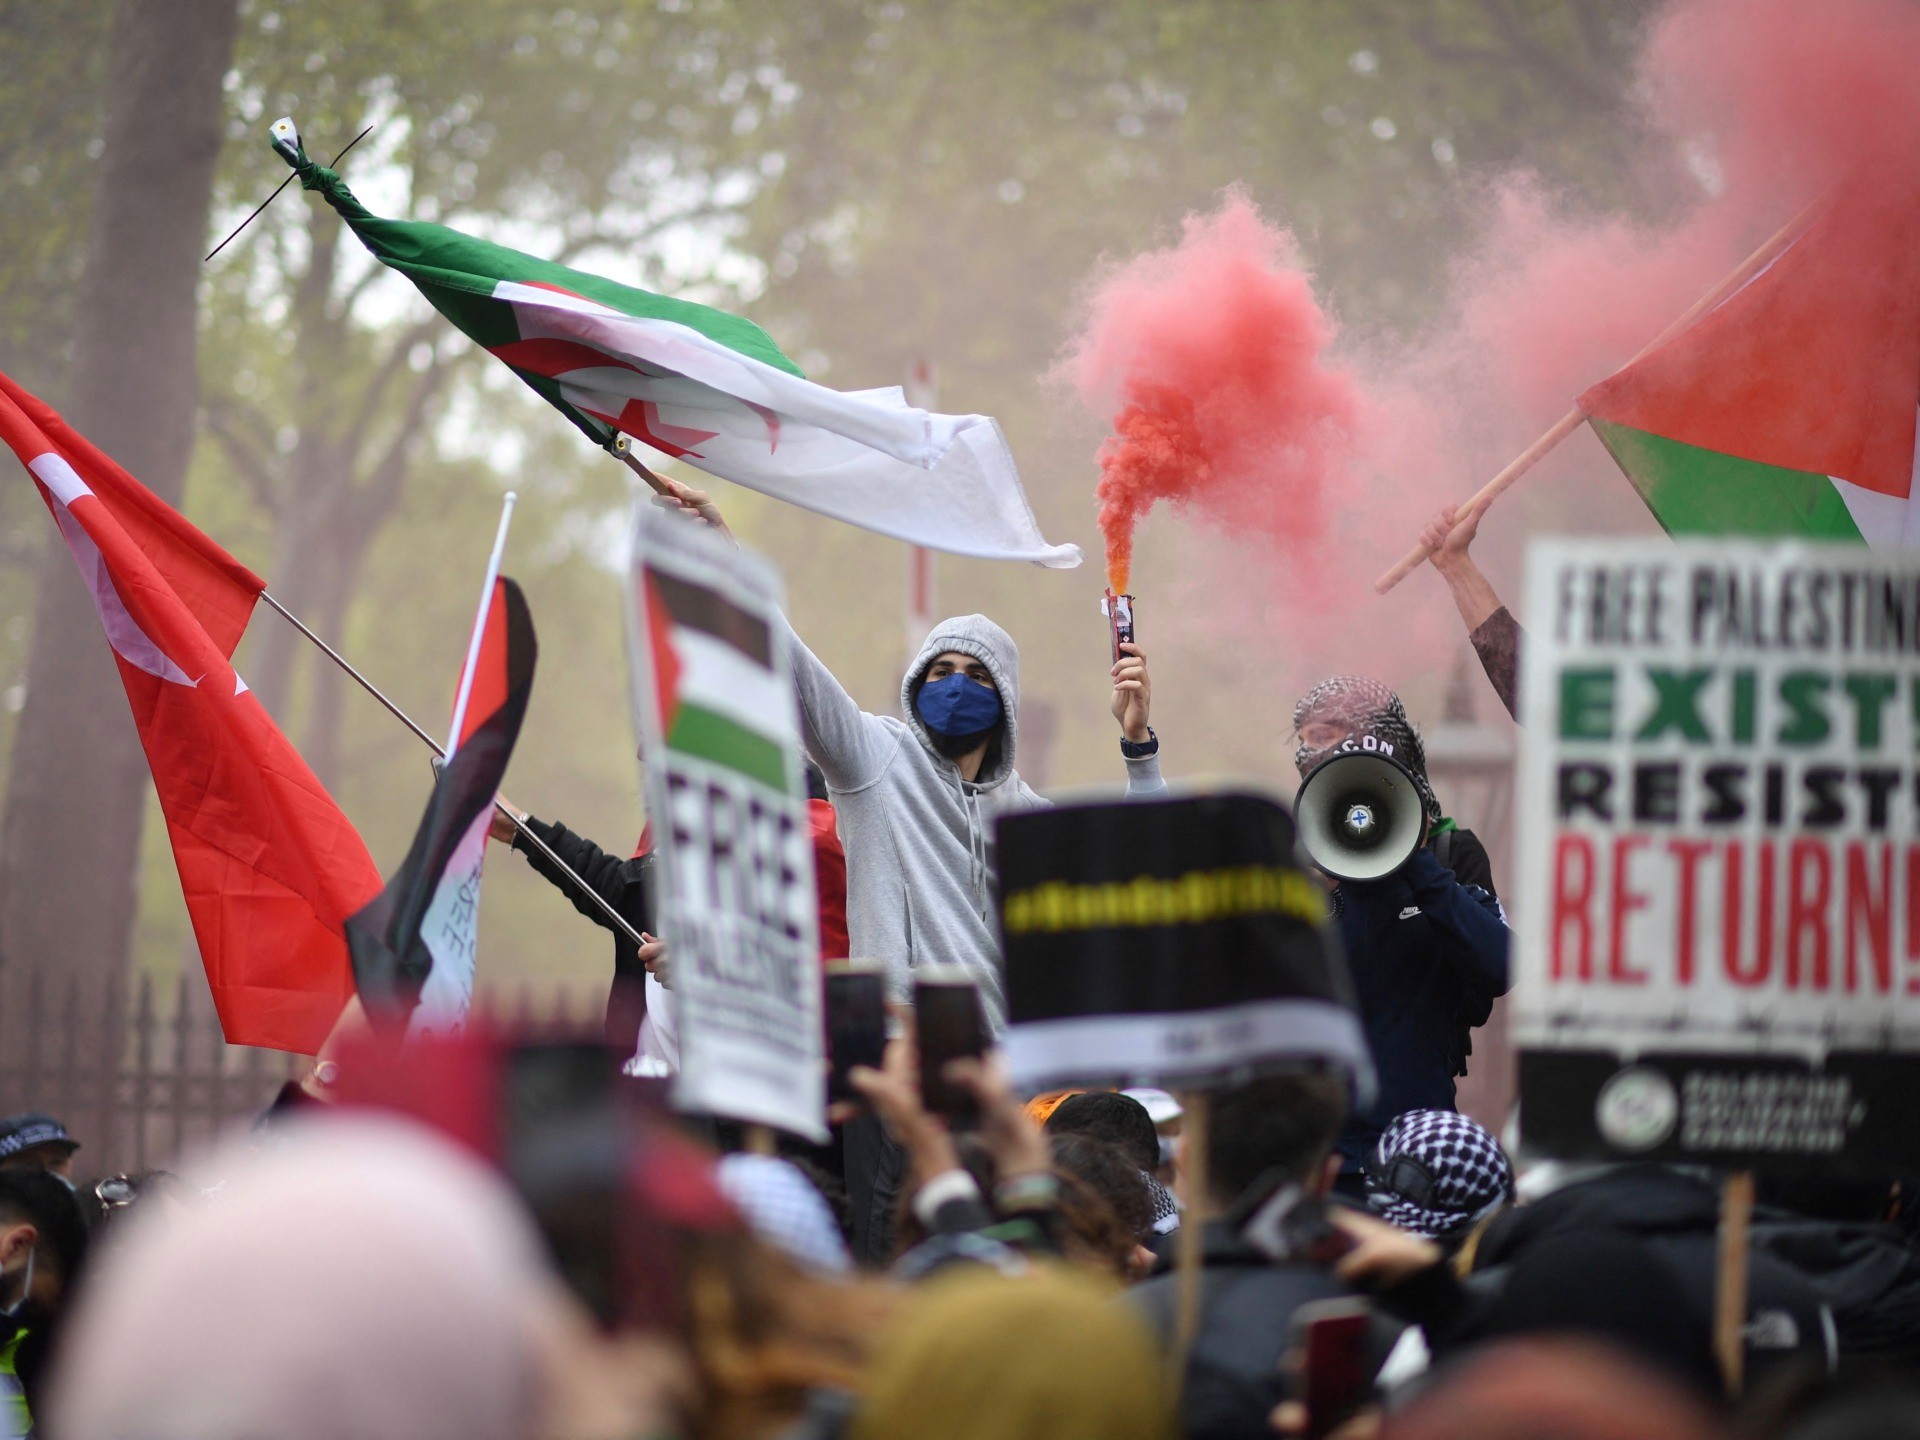 Pro-Palestinian activists and supporters demonstrate in support of the Palestinian cause outside the Israeli Embassy in central London on May 22, 2021. (Photo by JUSTIN TALLIS / AFP) (Photo by JUSTIN TALLIS/AFP via Getty Images)